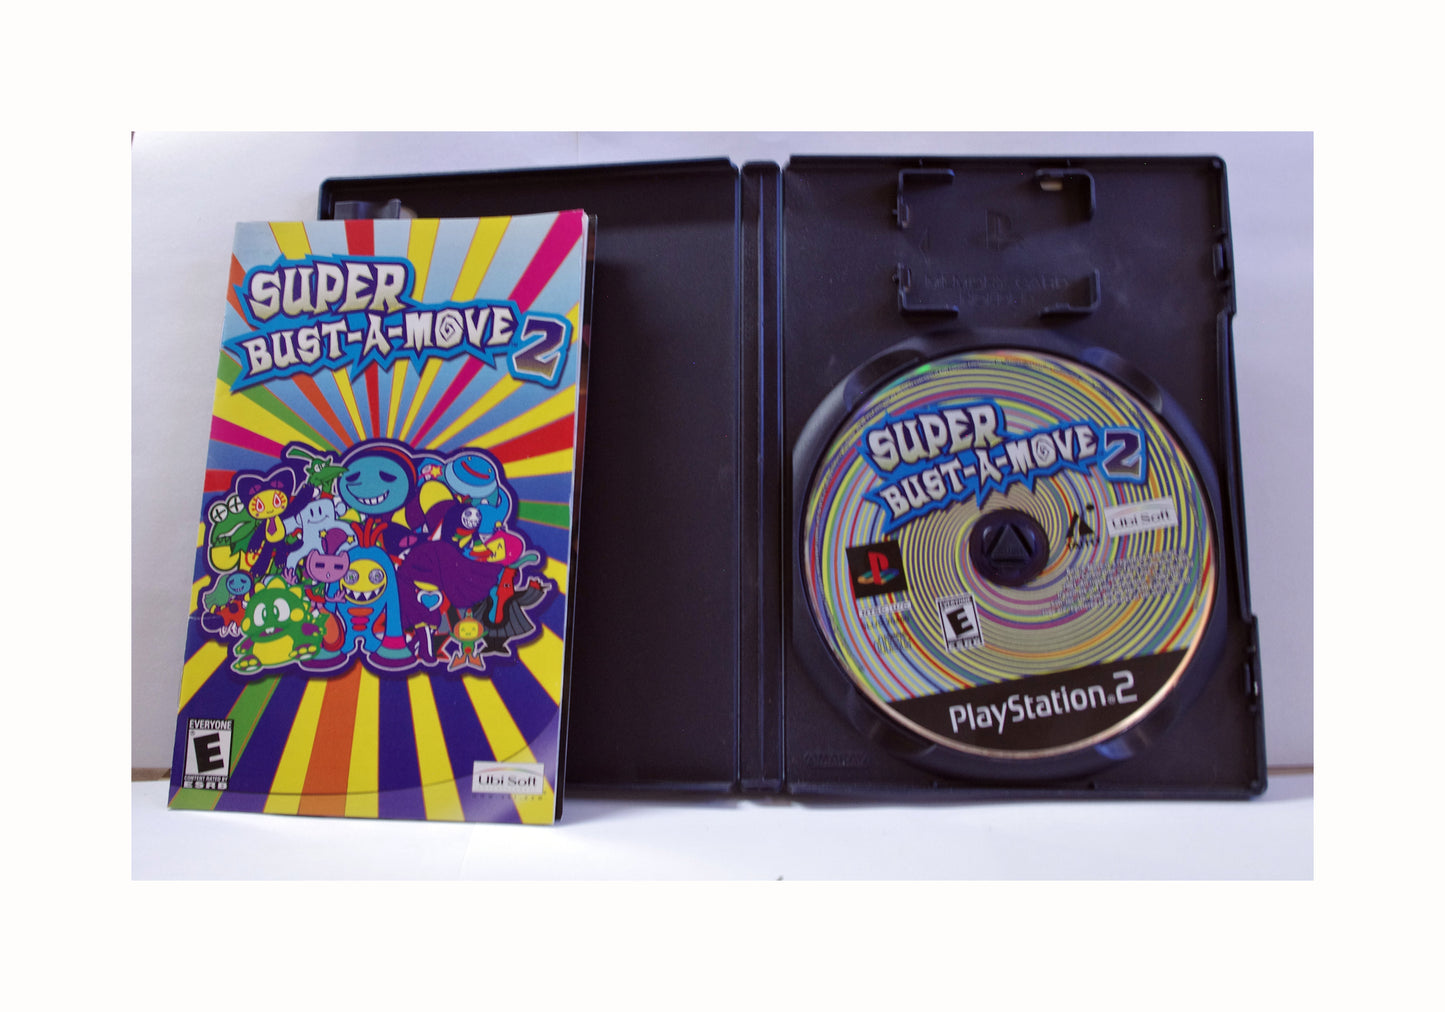 PlayStation 2 Game - Super Bust-A-Move 2